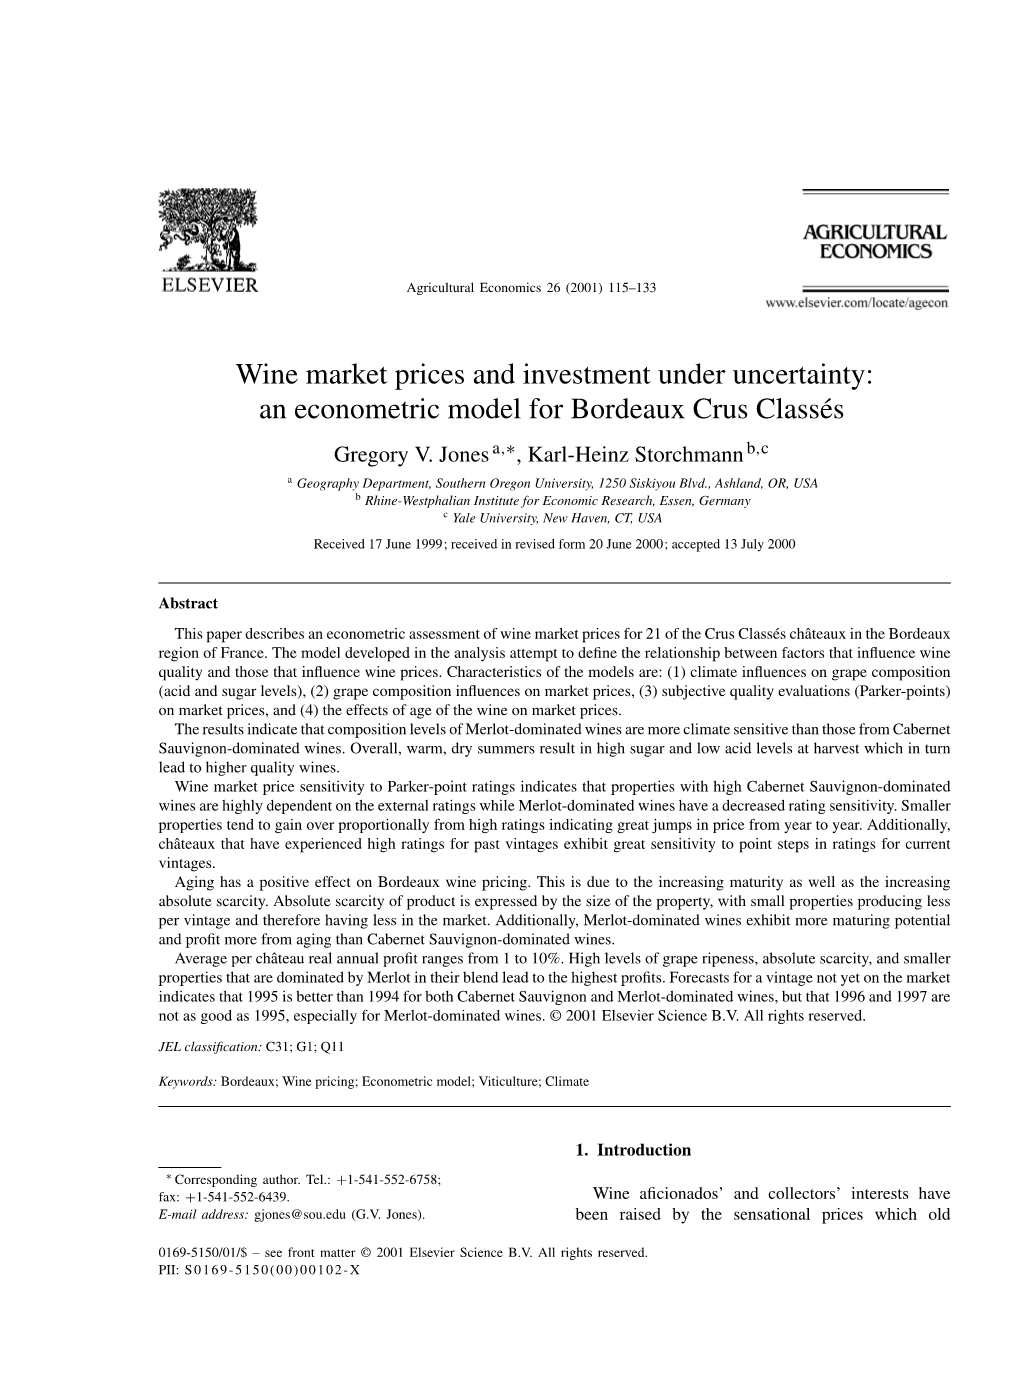 Wine Market Prices and Investment Under Uncertainty: an Econometric Model for Bordeaux Crus Classés Gregory V